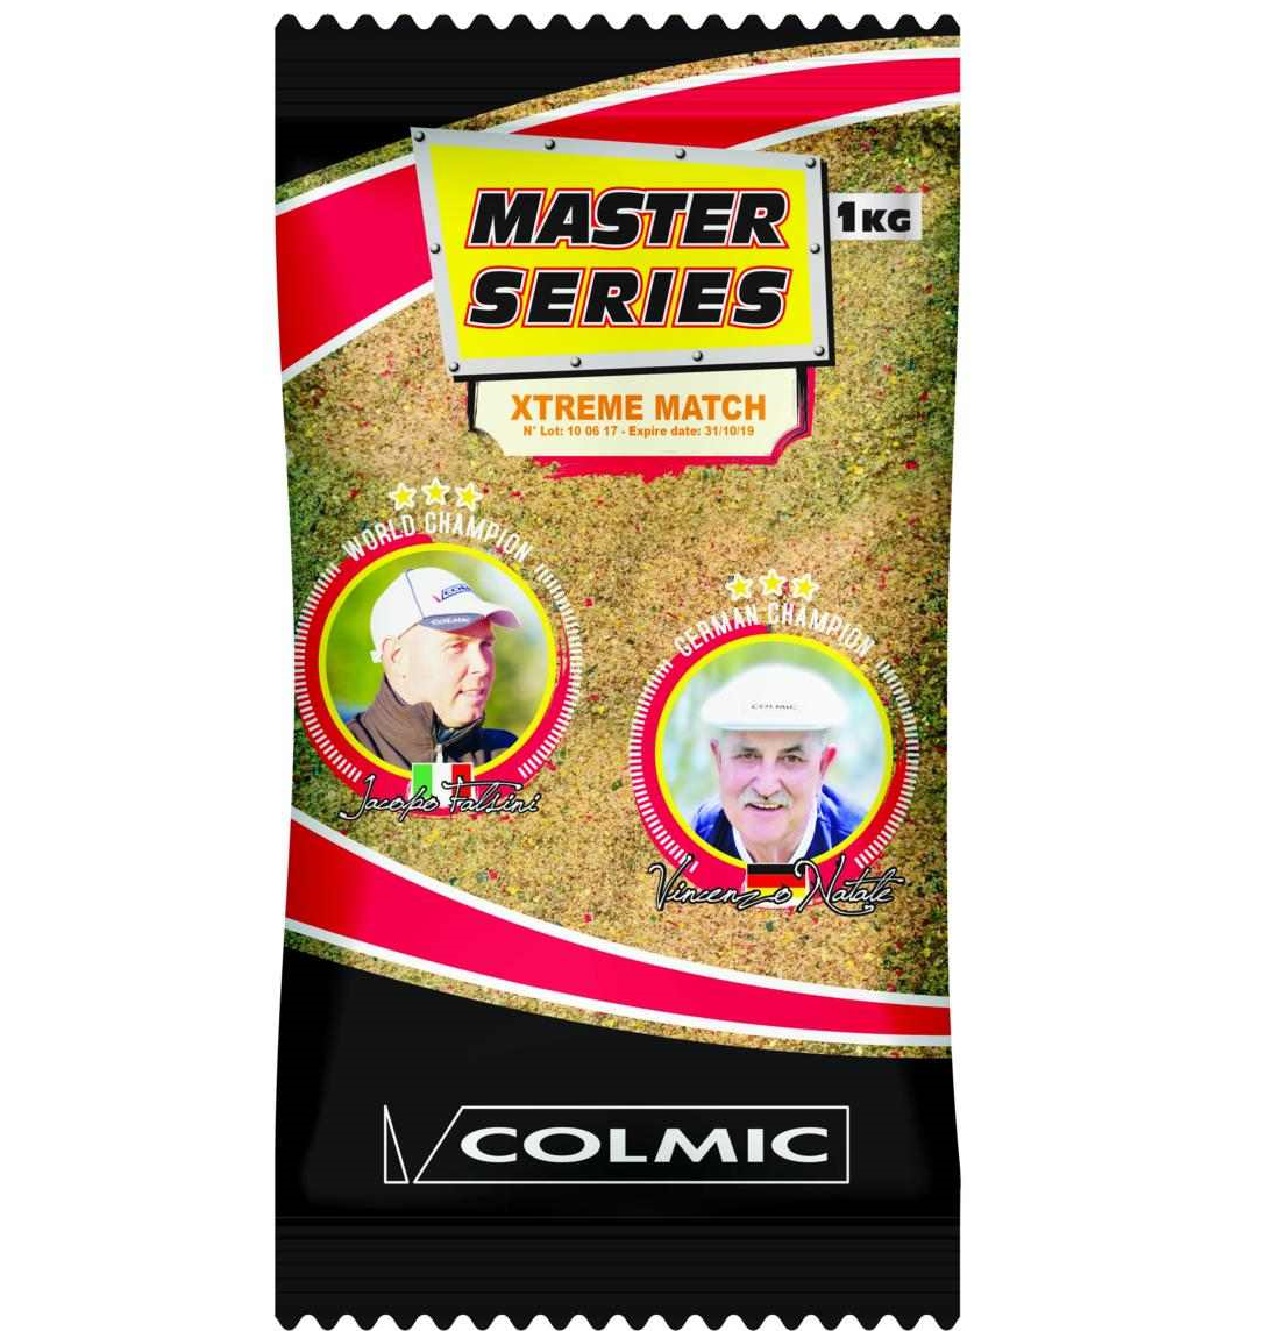 colmic MASTER SERIES : EXTREME MATCH PCMS01.jpg